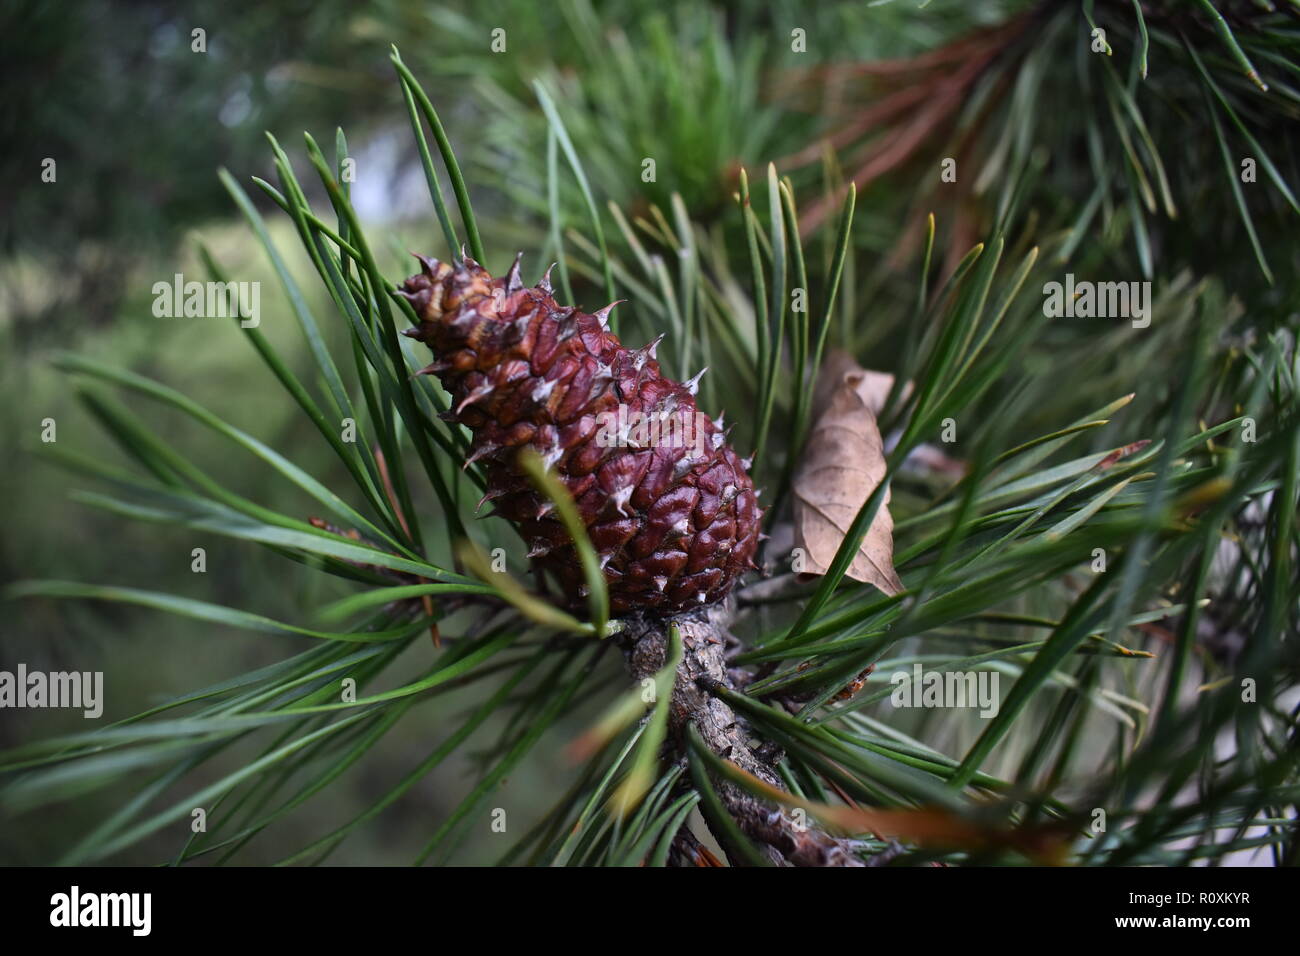 Close up of pine cone attached to pine tree Stock Photo